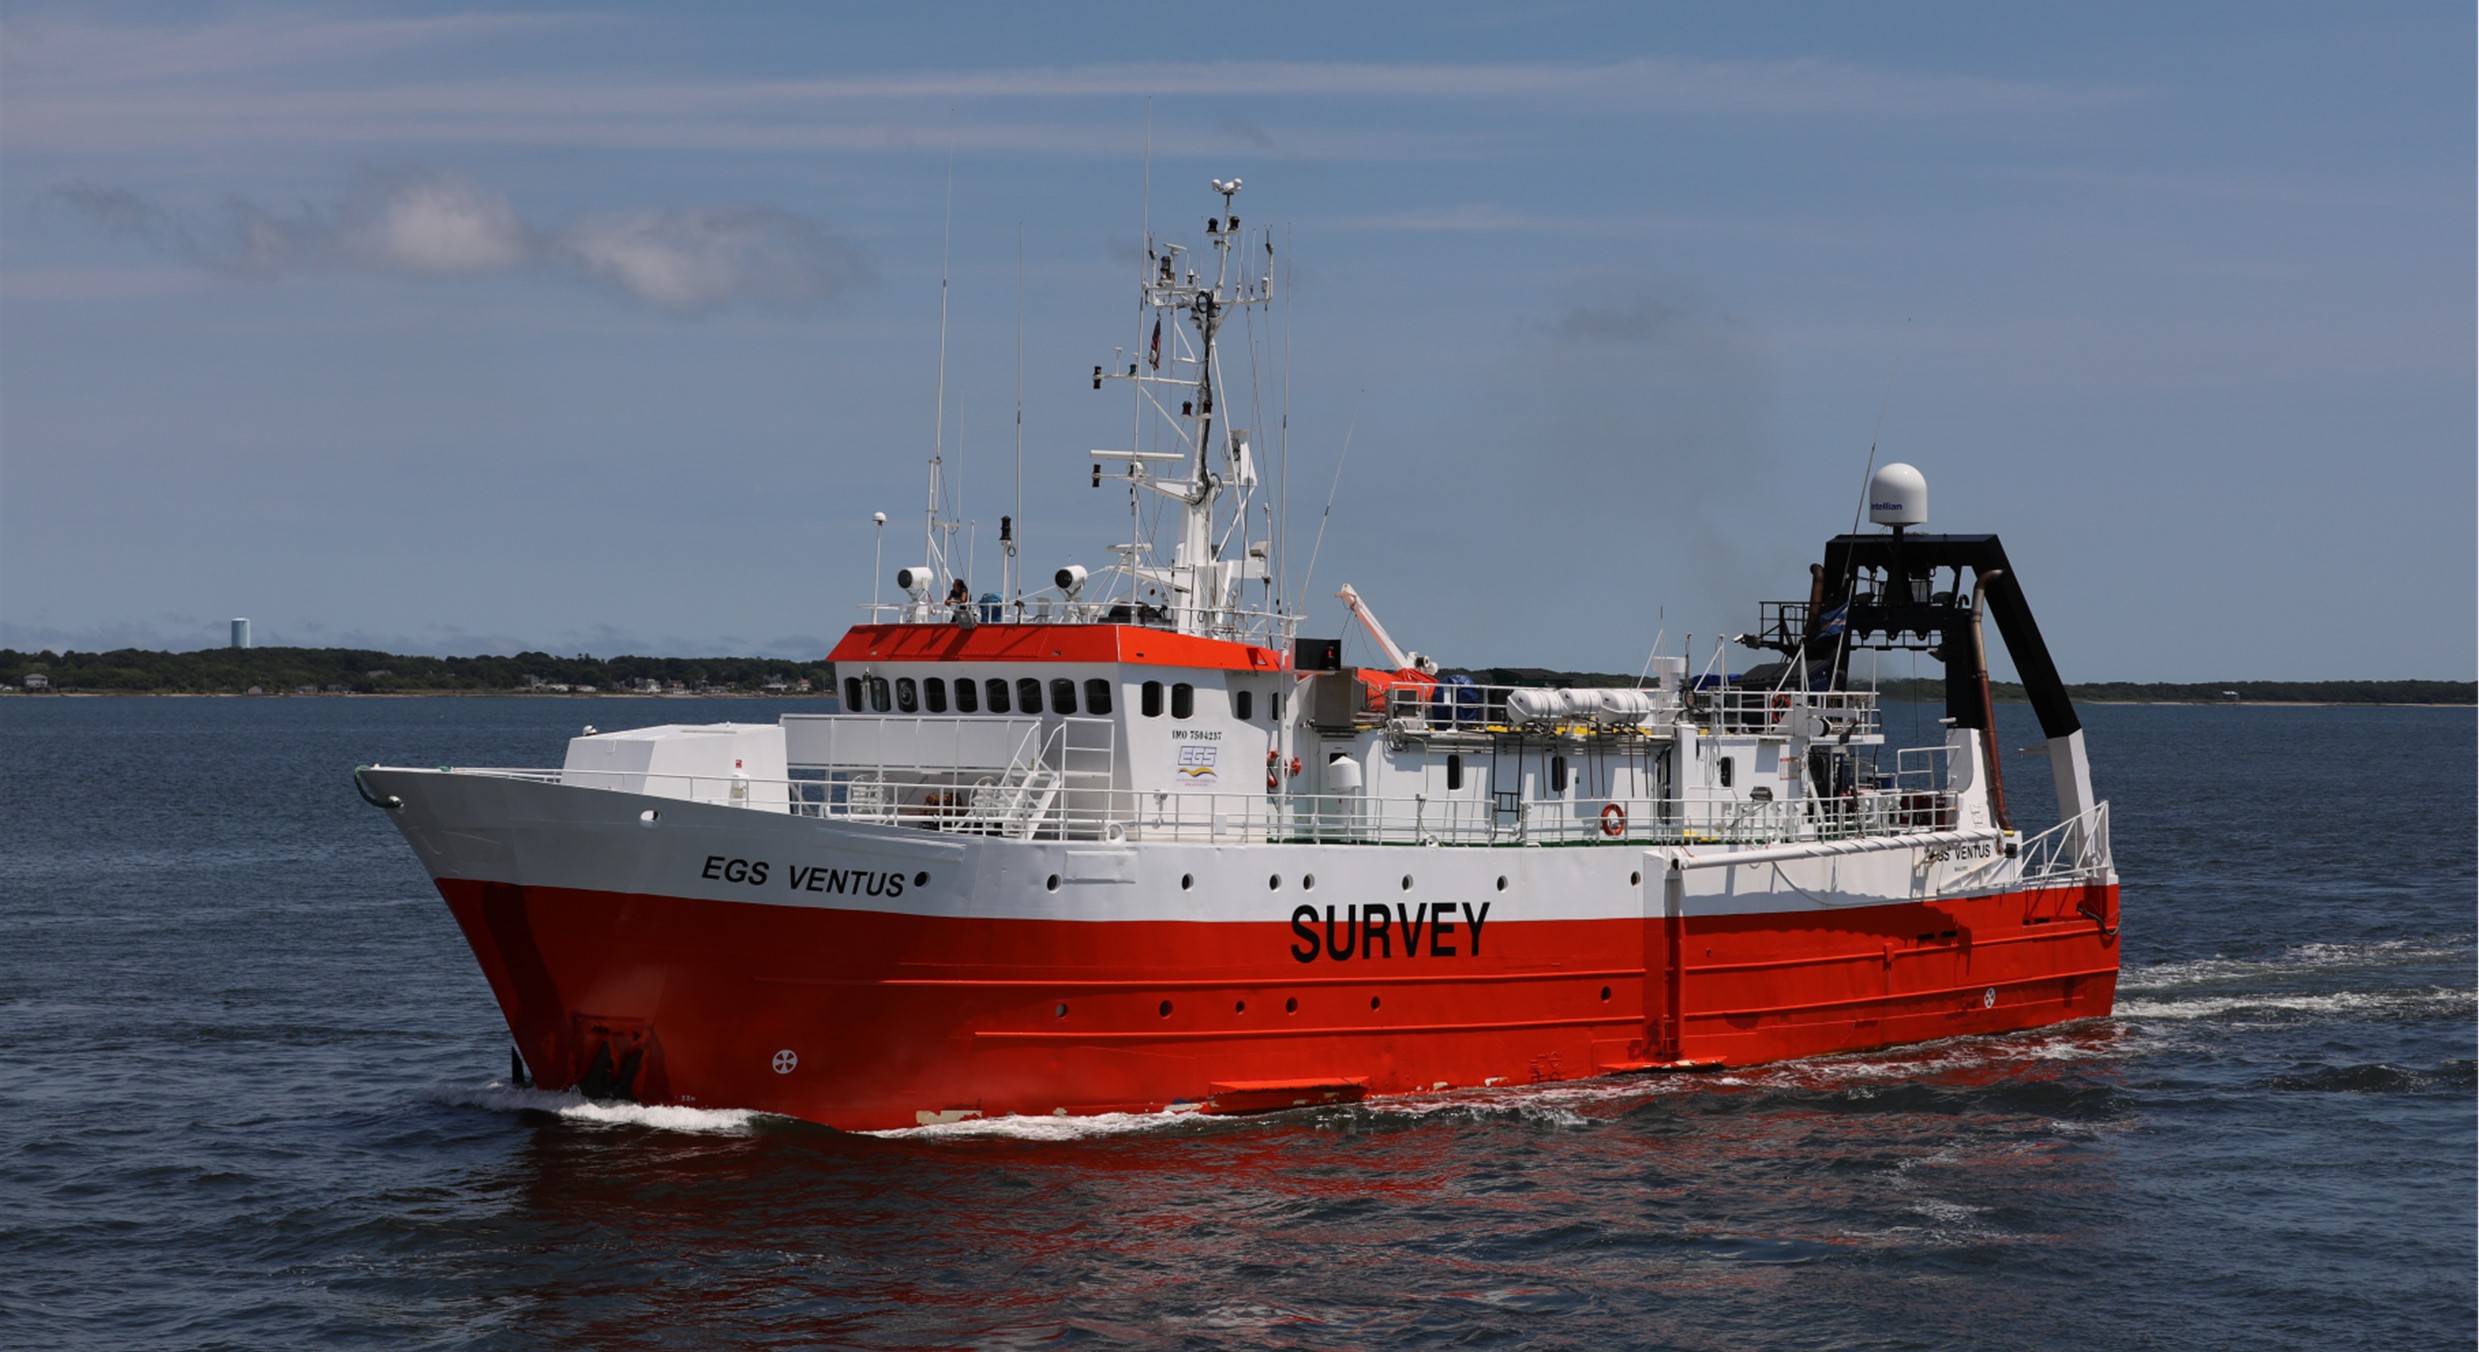 A photo of the white-red survey vessel EGS Ventus